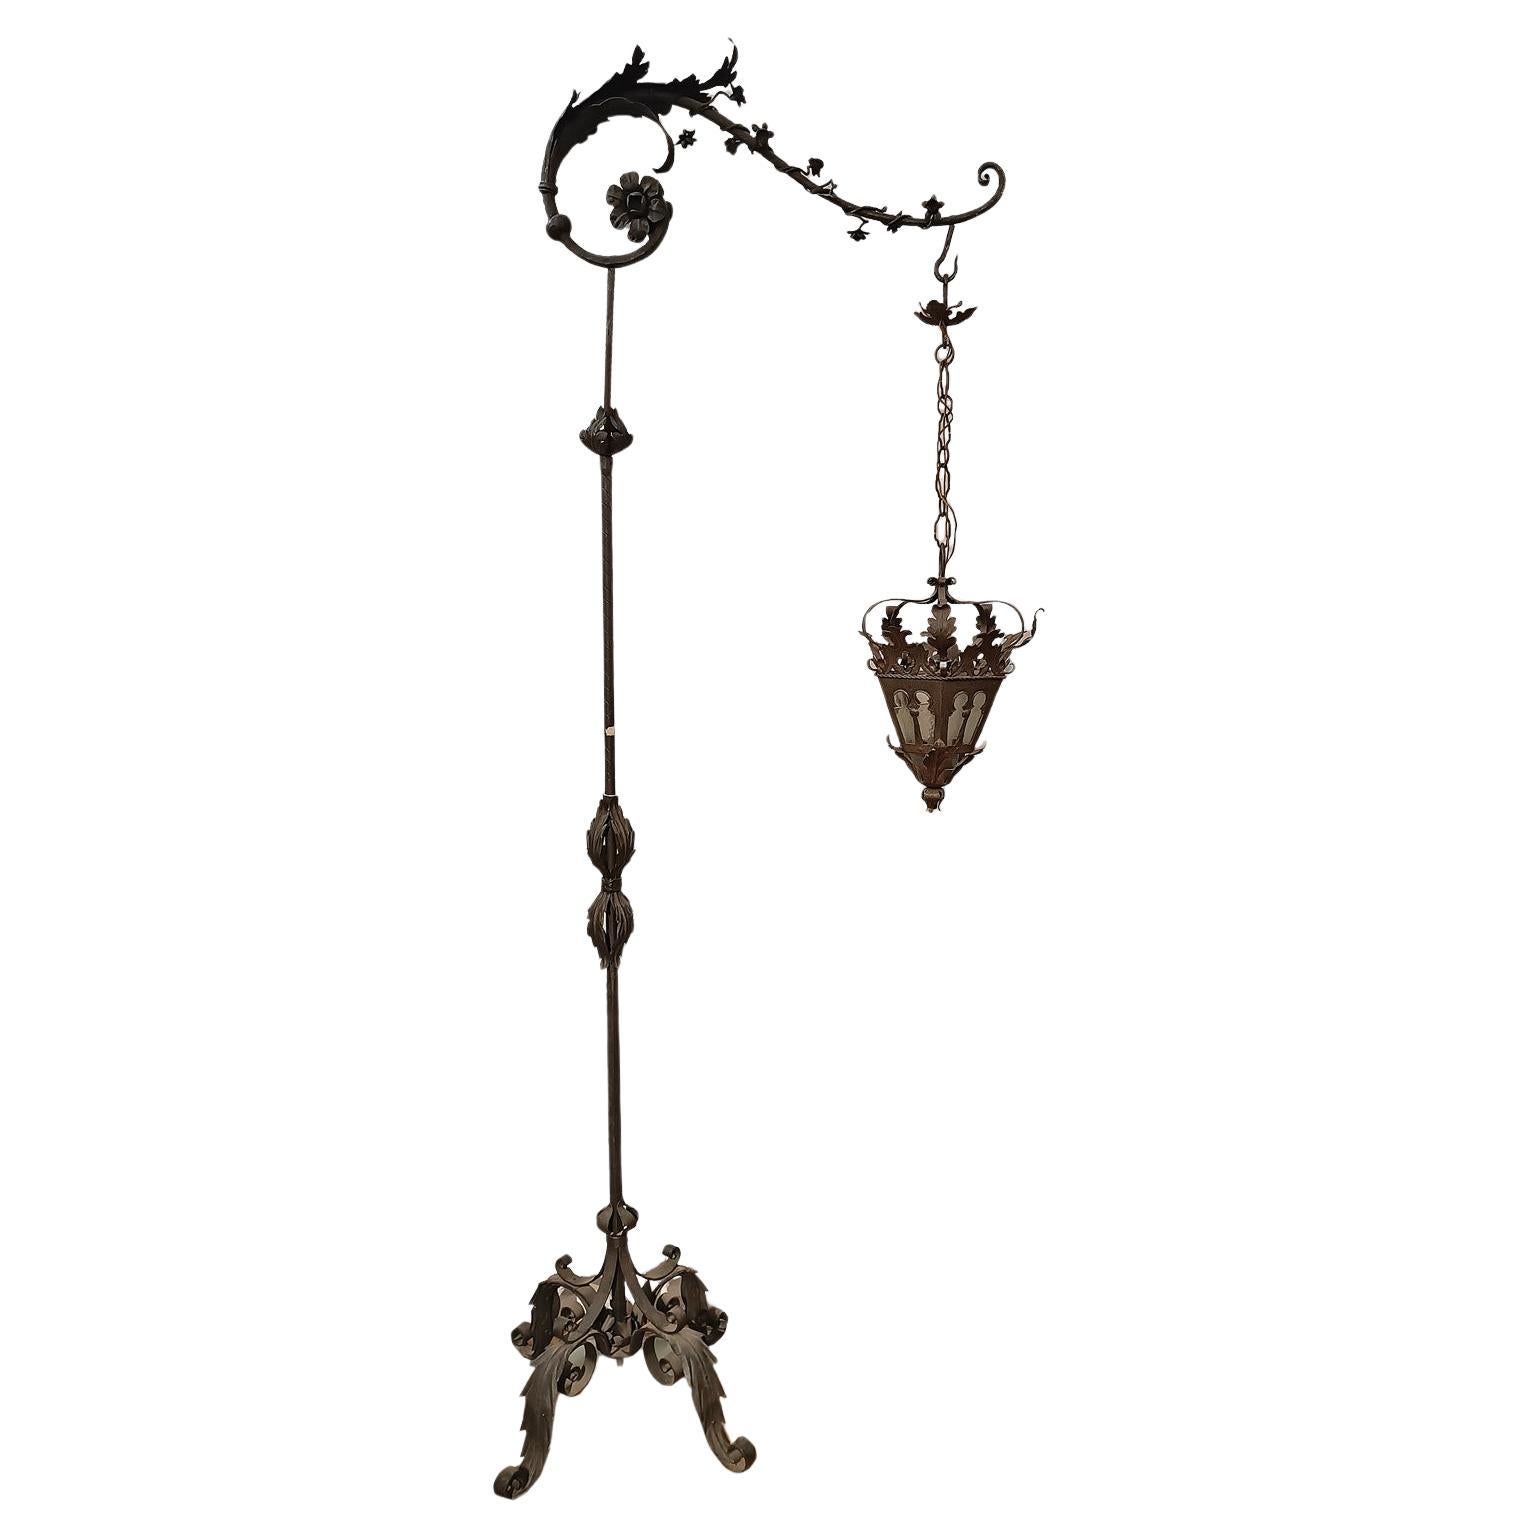 END OF THE 19th CENTURY IRON LANTERN HOLDER For Sale